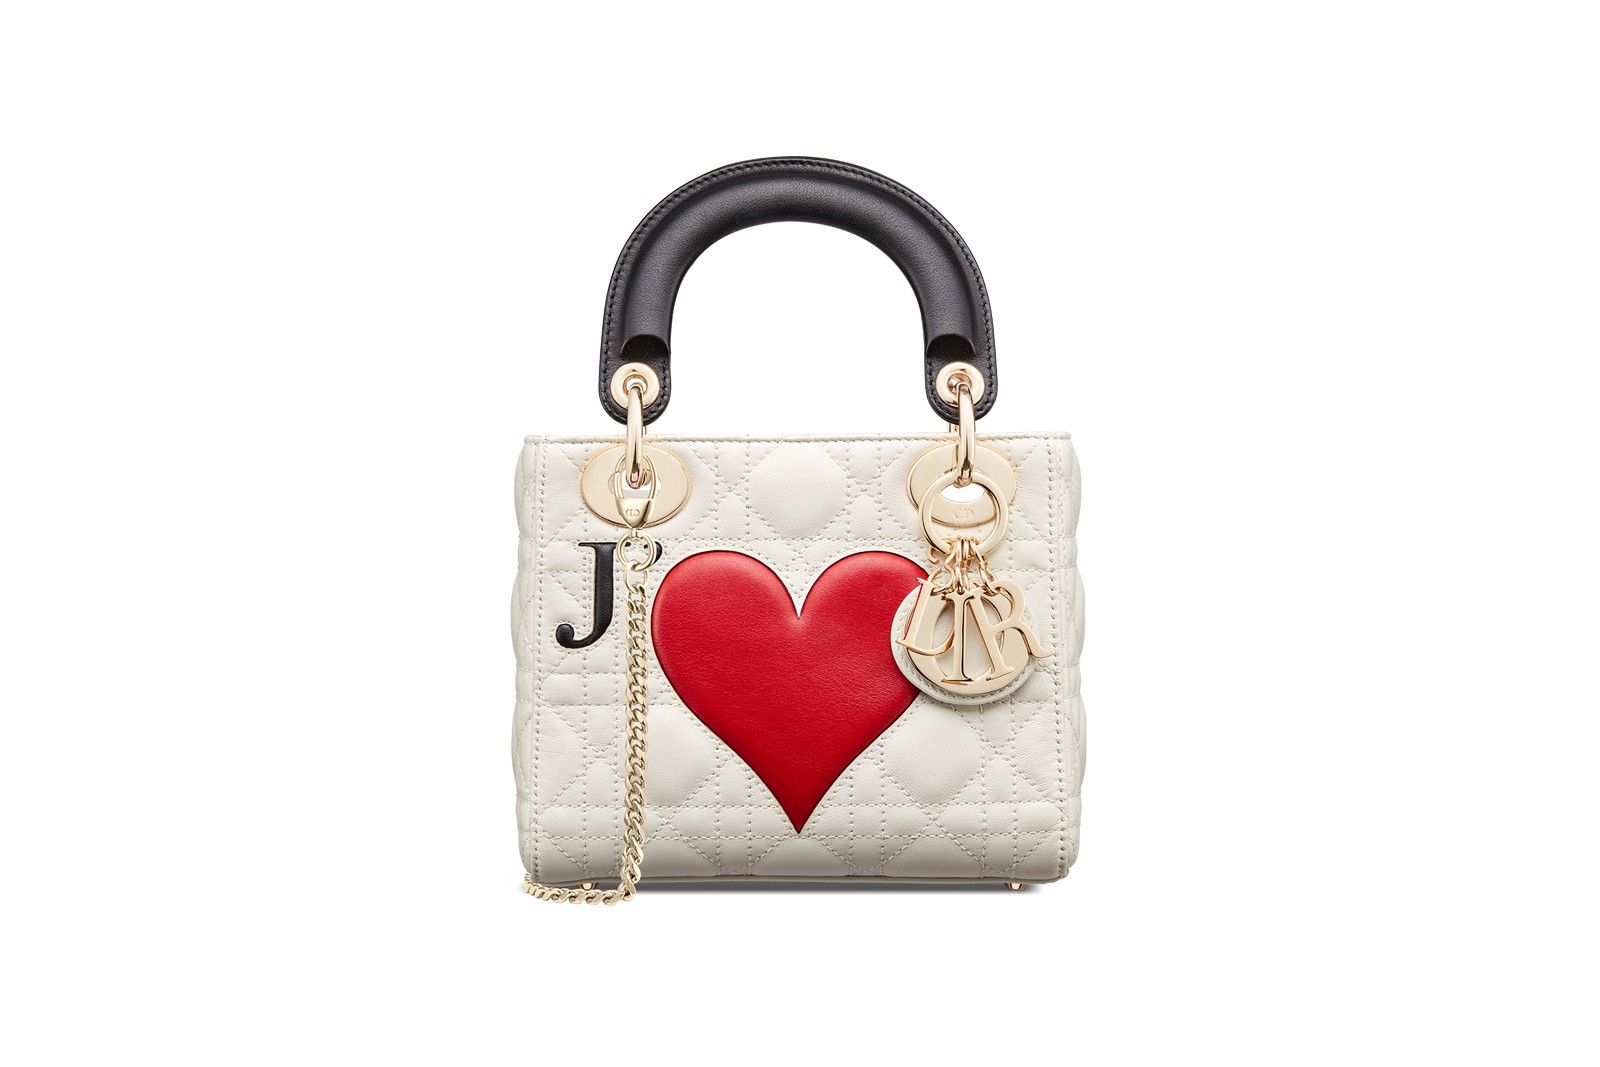 Dior celebrates love with its Dioramour line